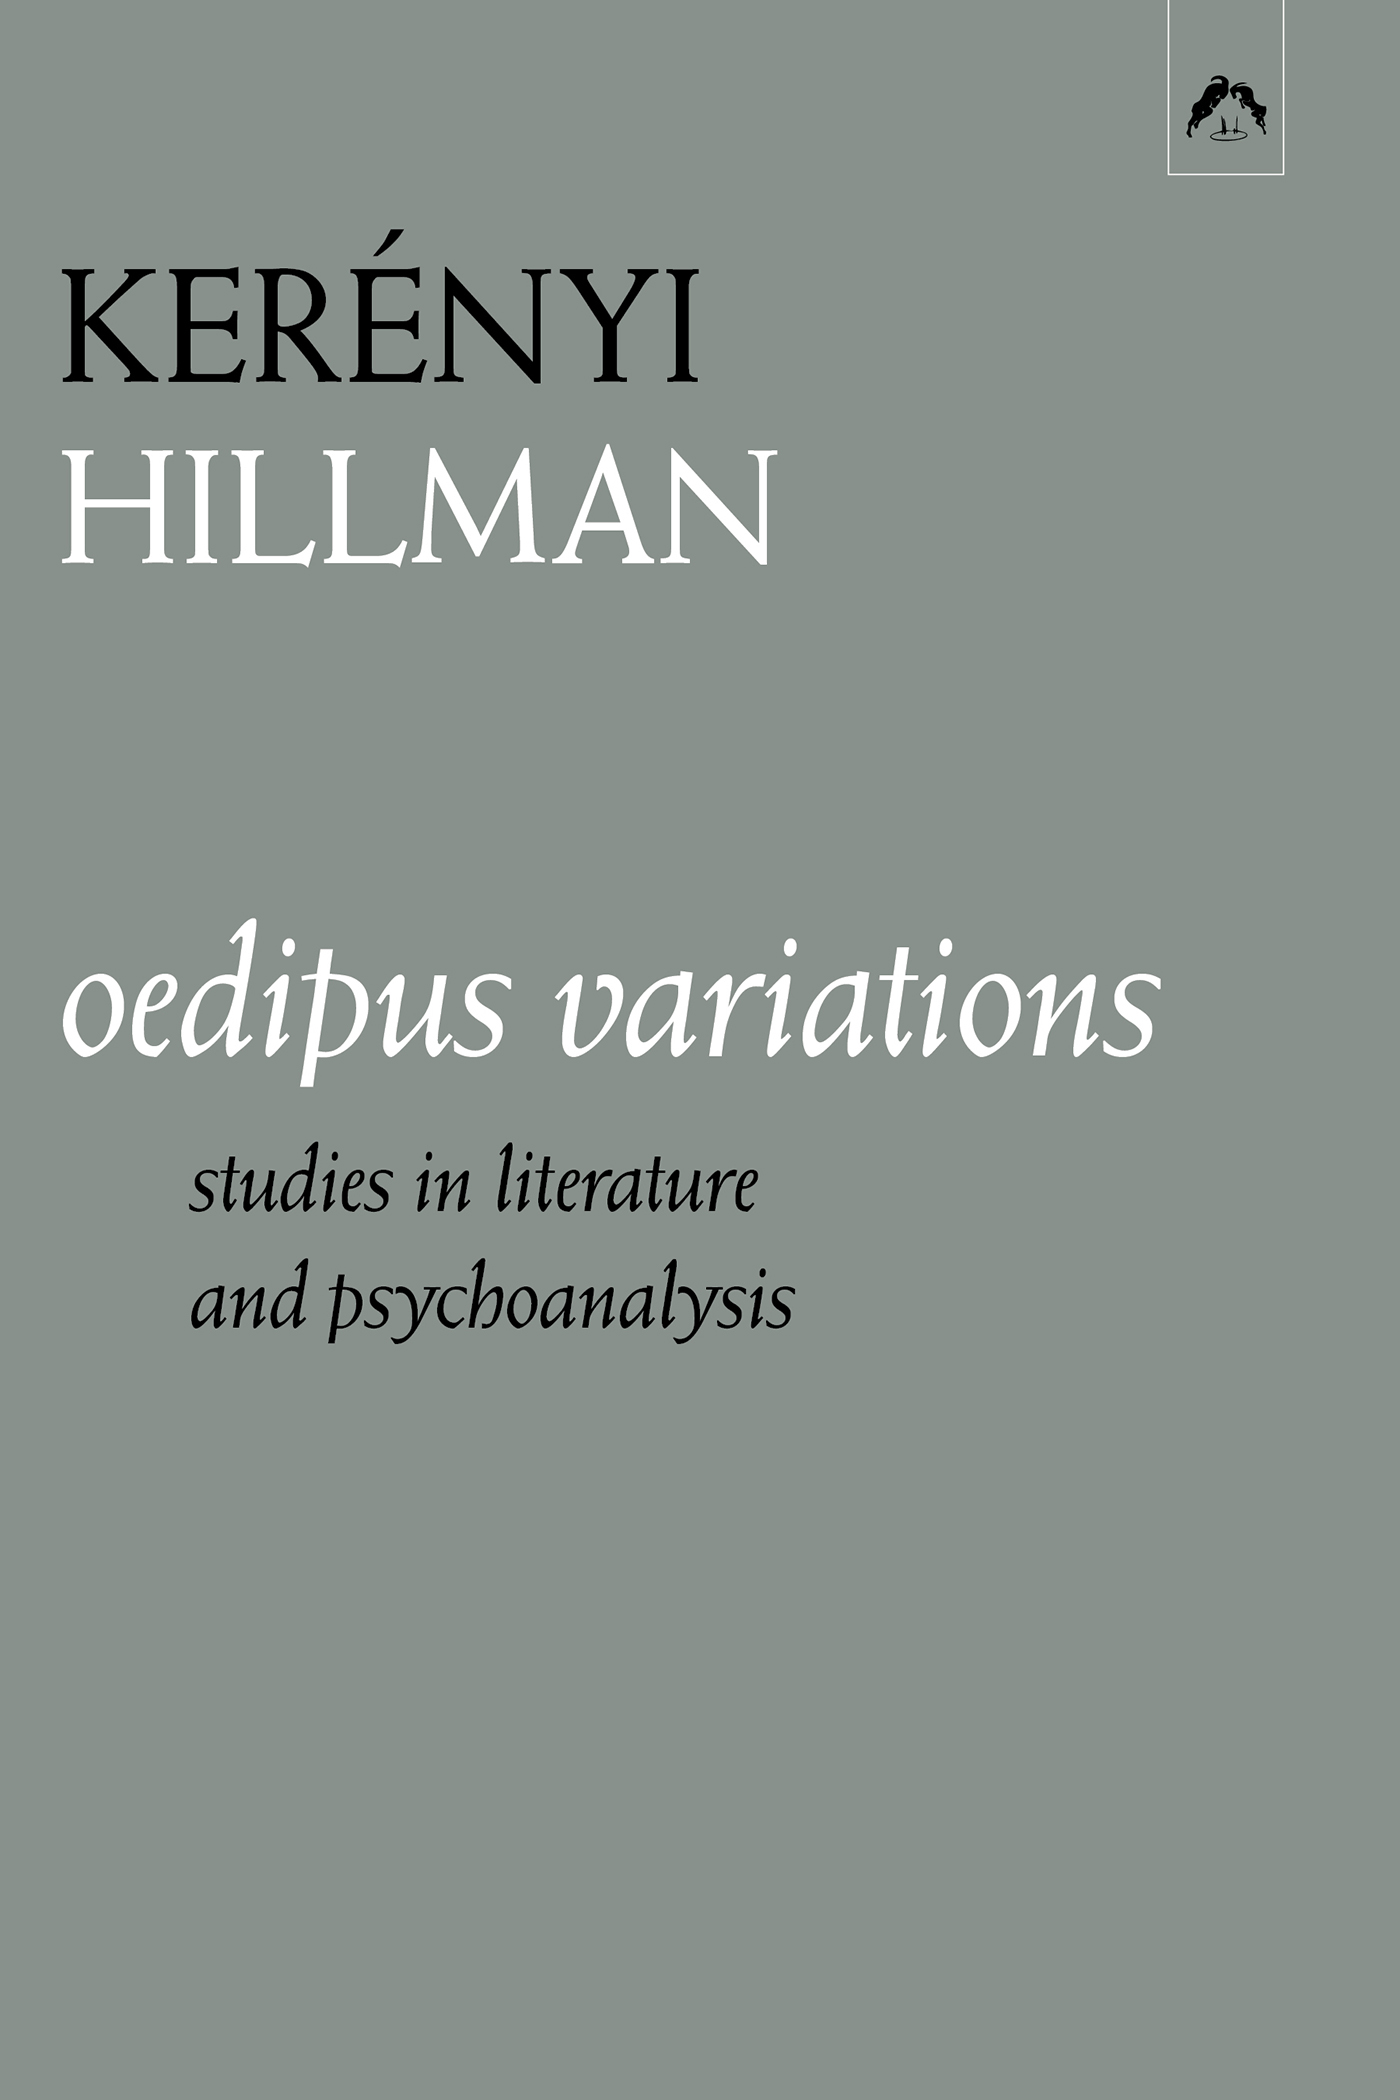 Cover image for Oedipus Variations